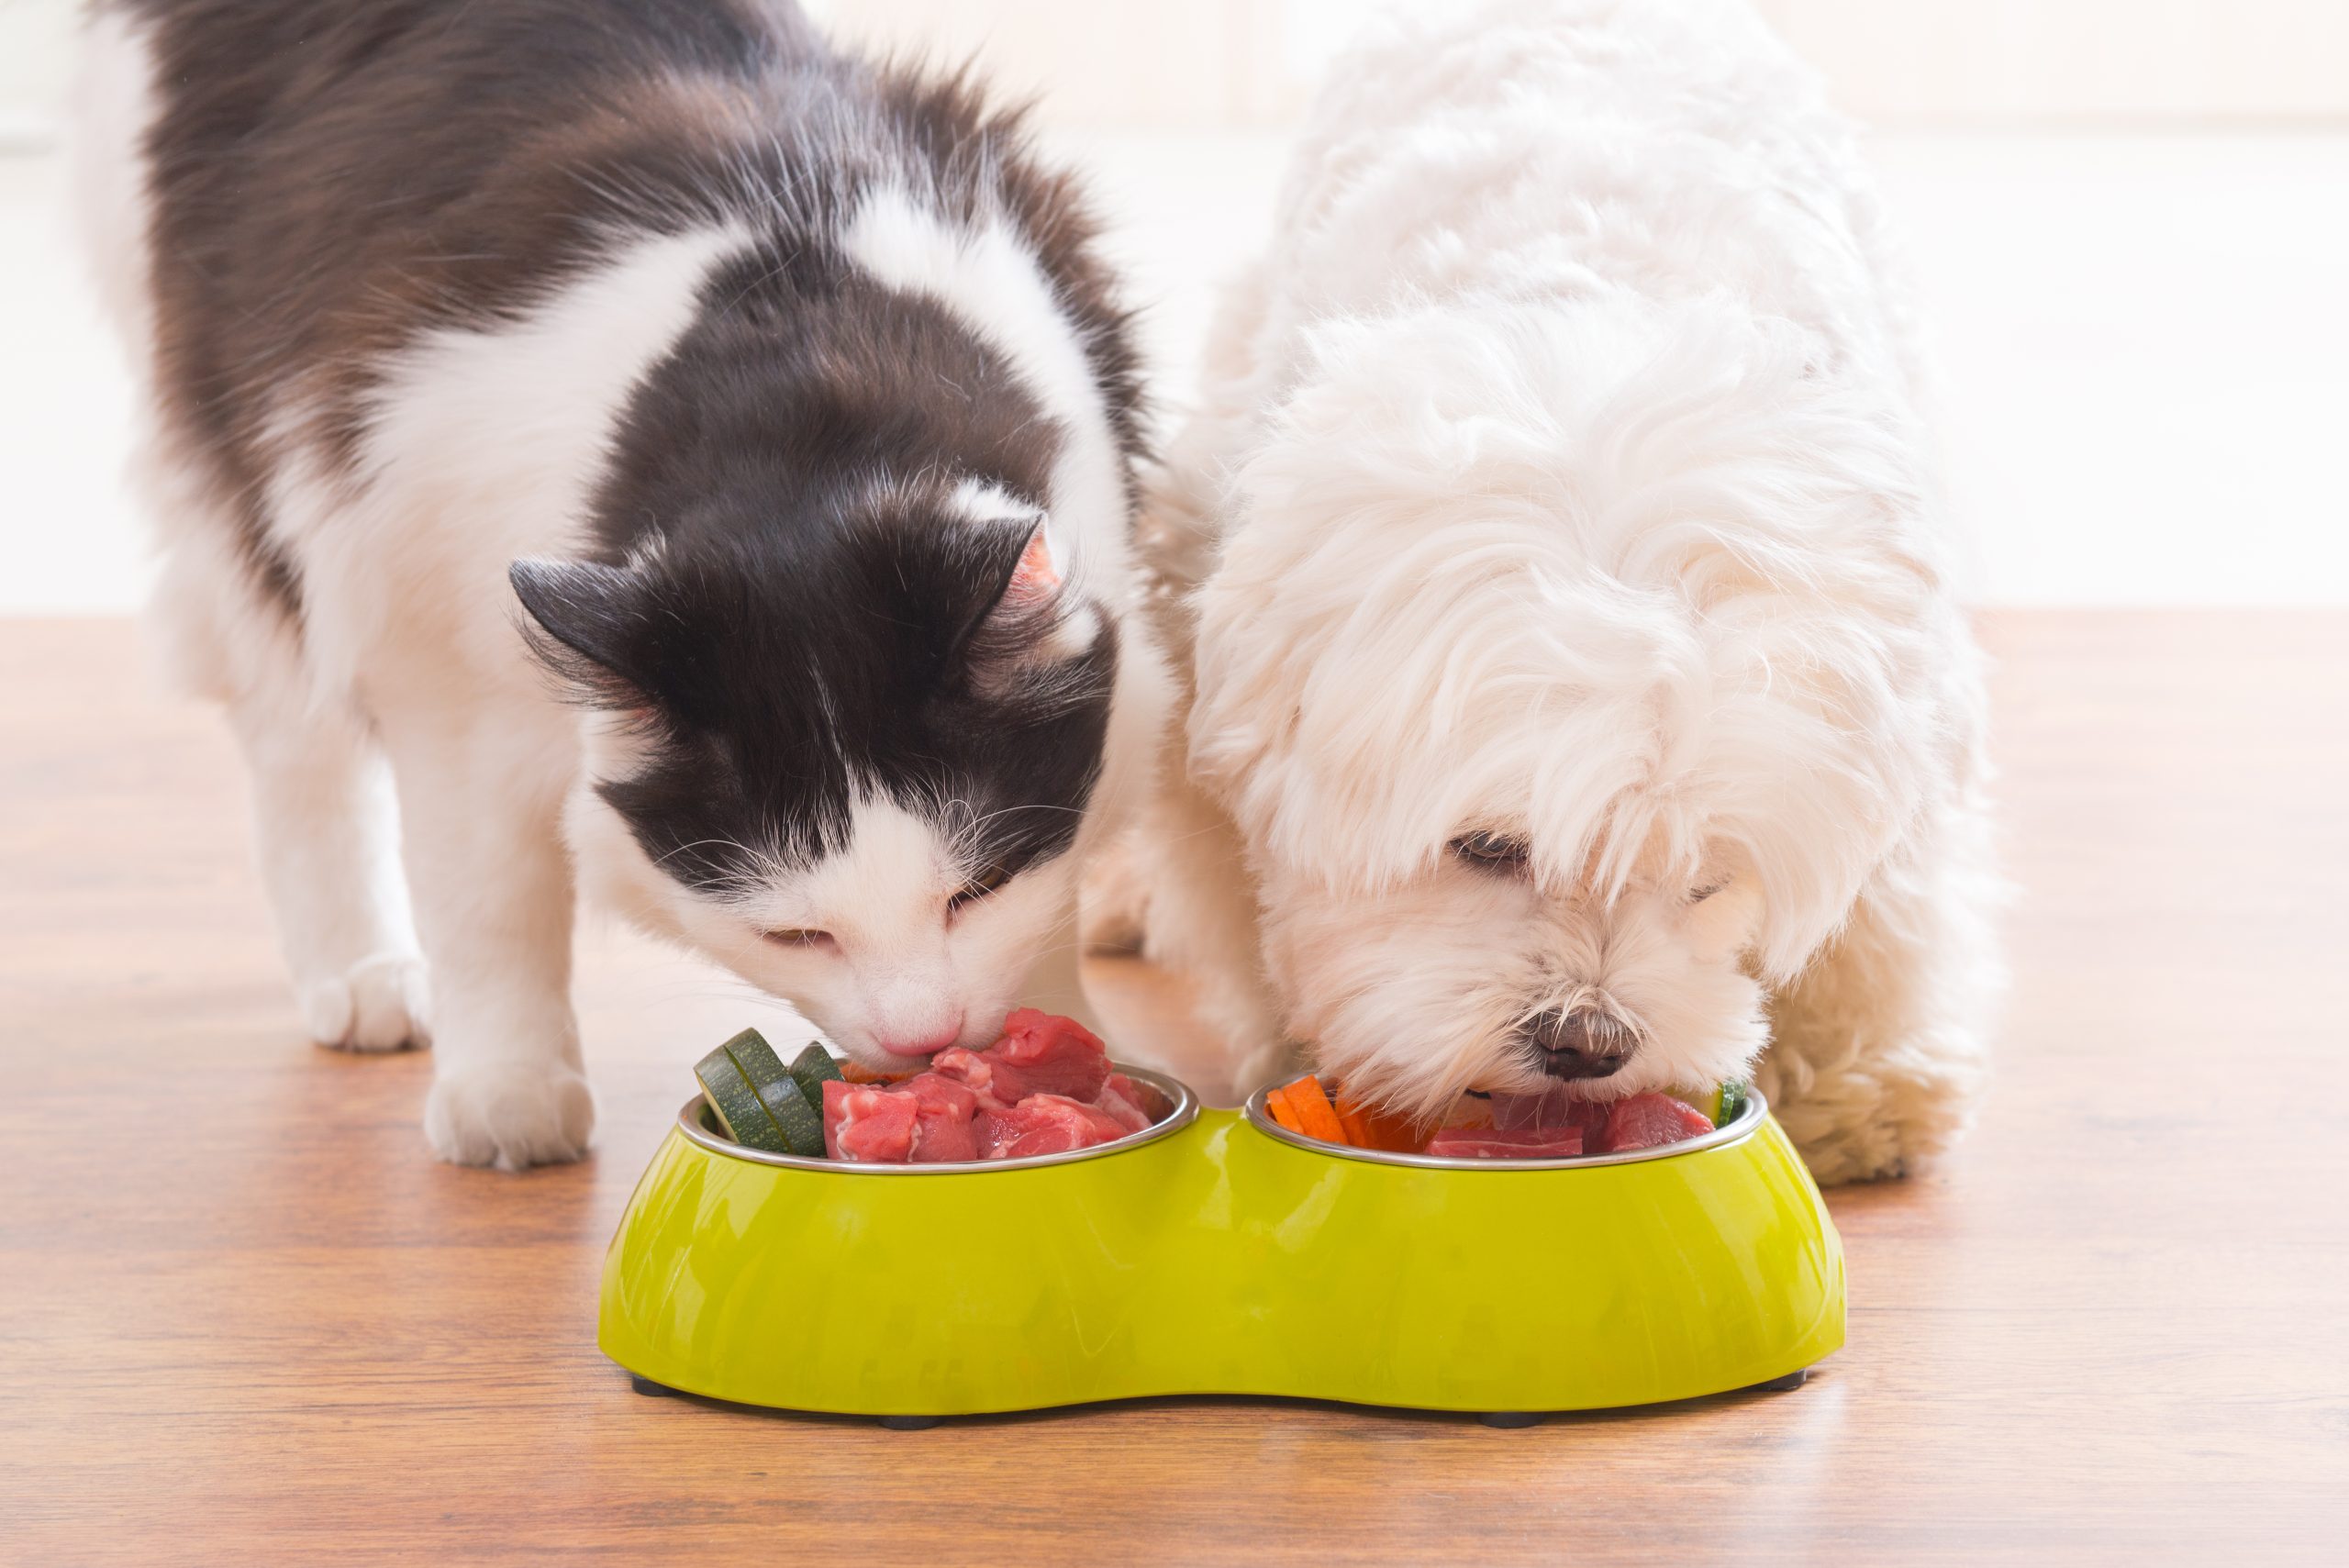 Webinar to explain bacterial risks of raw food diet for pets